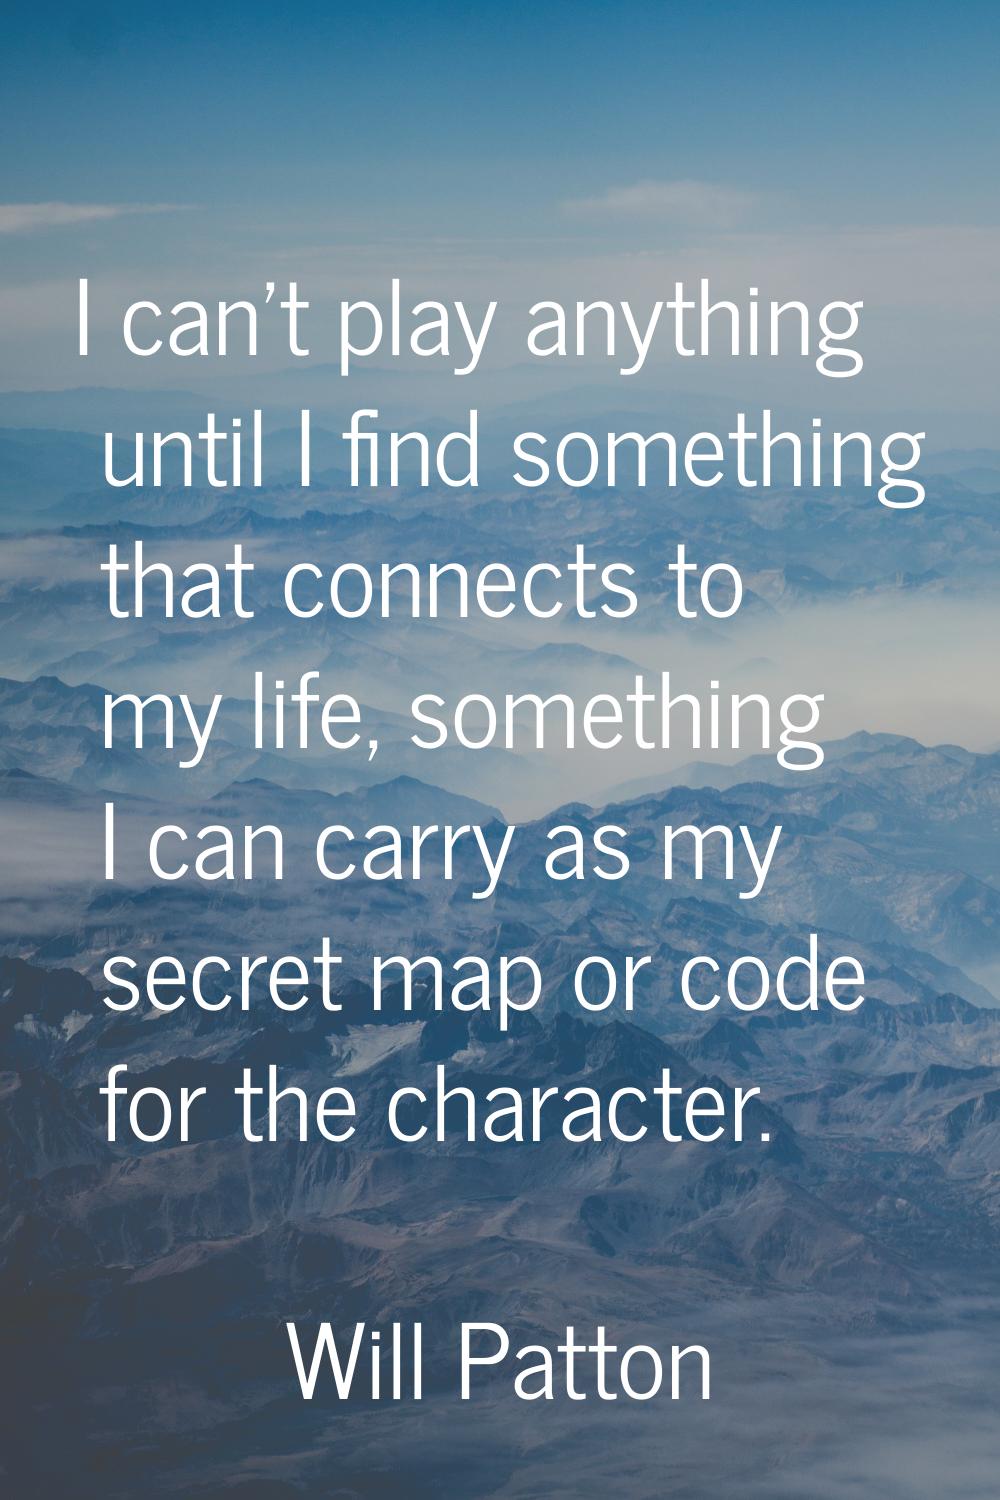 I can't play anything until I find something that connects to my life, something I can carry as my 